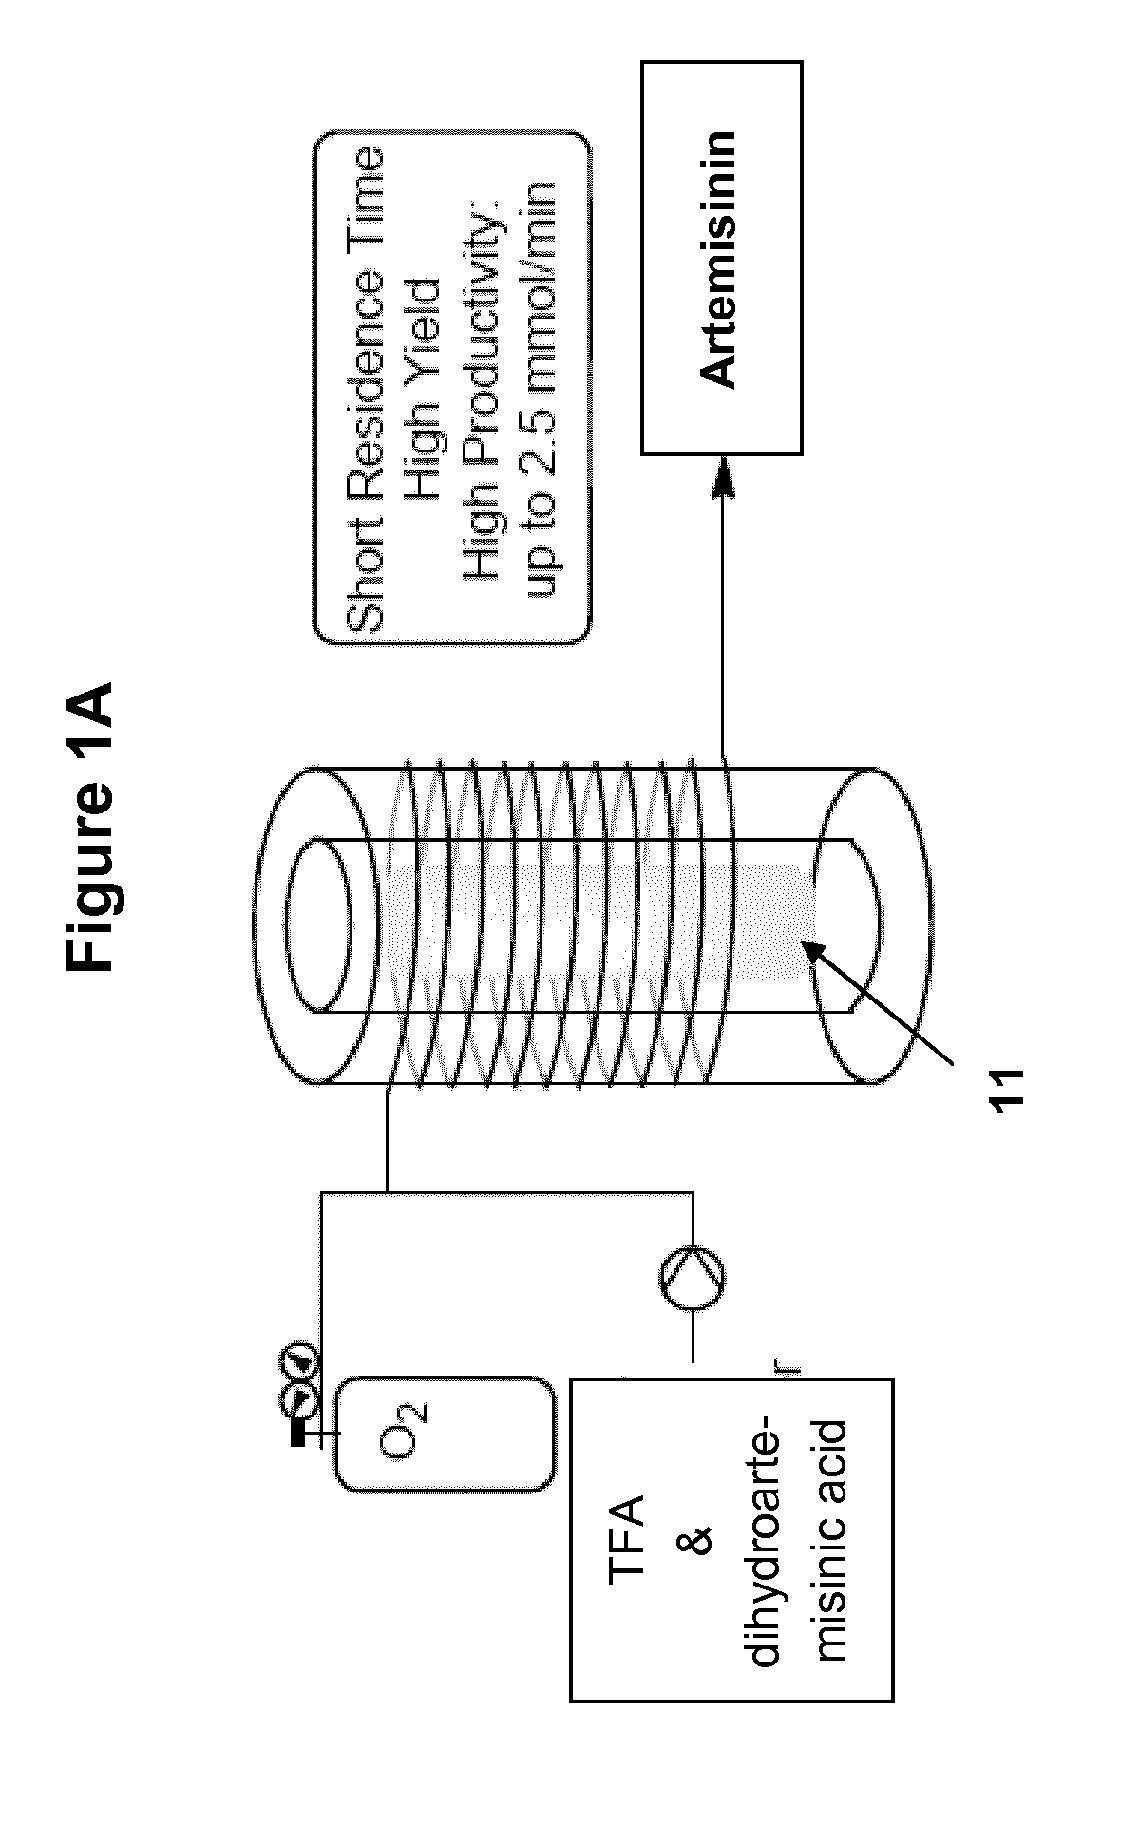 Method and apparatus for the synthesis of dihydroartemisinin and artemisinin derivatives